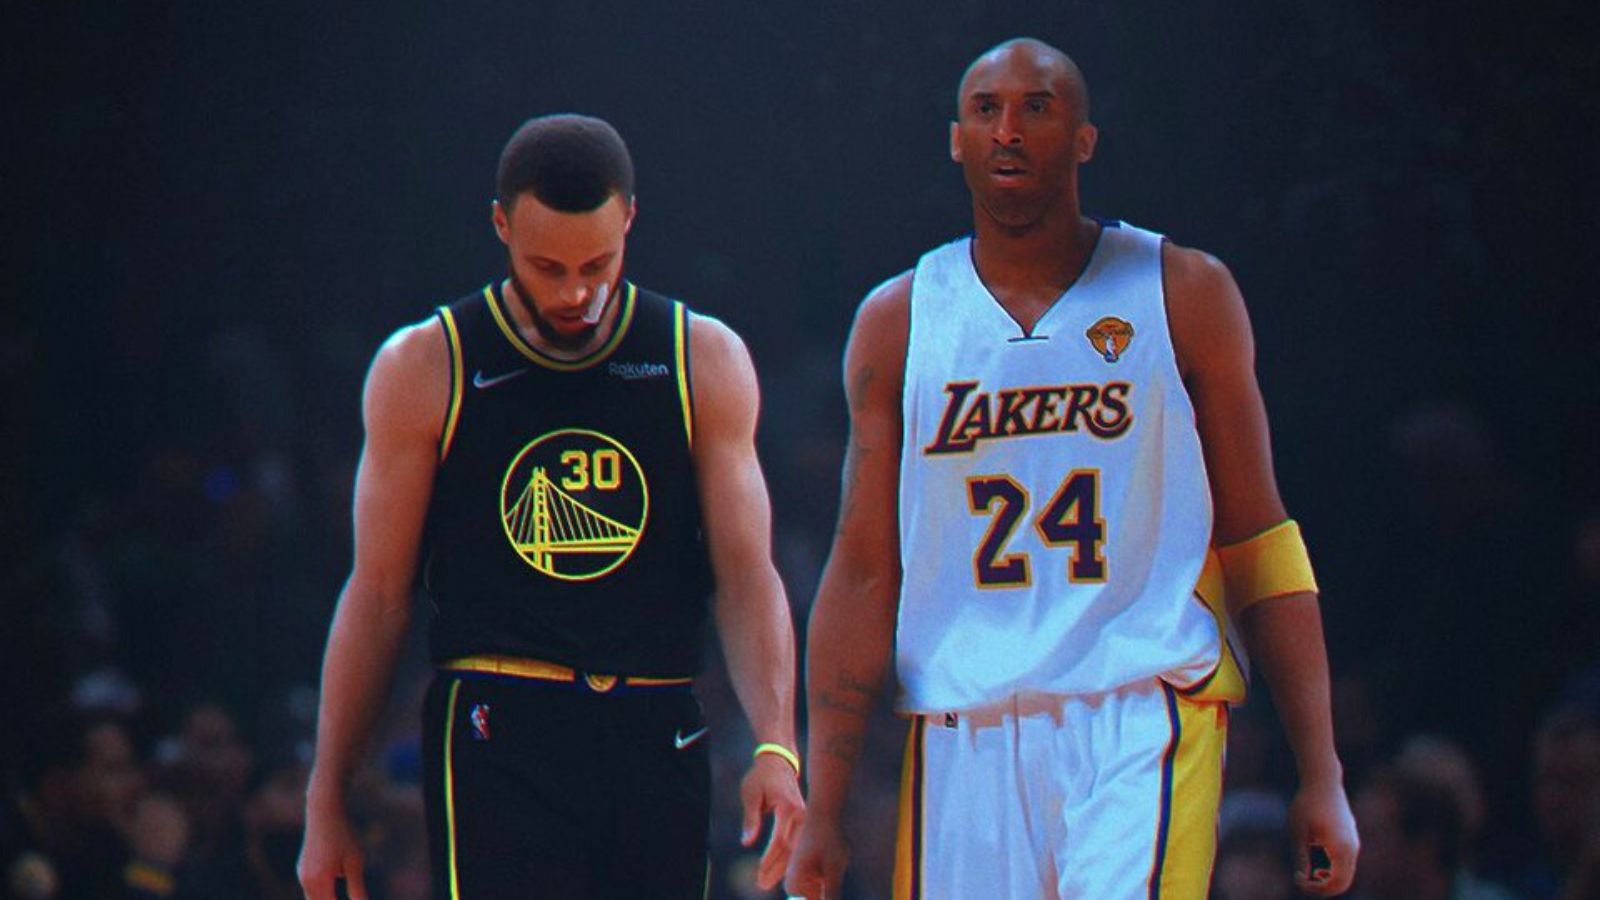 The difference between Kobe Bryant and Stephen Curry is. a Hall of Fame career”: NBA Twitter notices huge gap in career achievements between Warriors MVP and Lakers legend